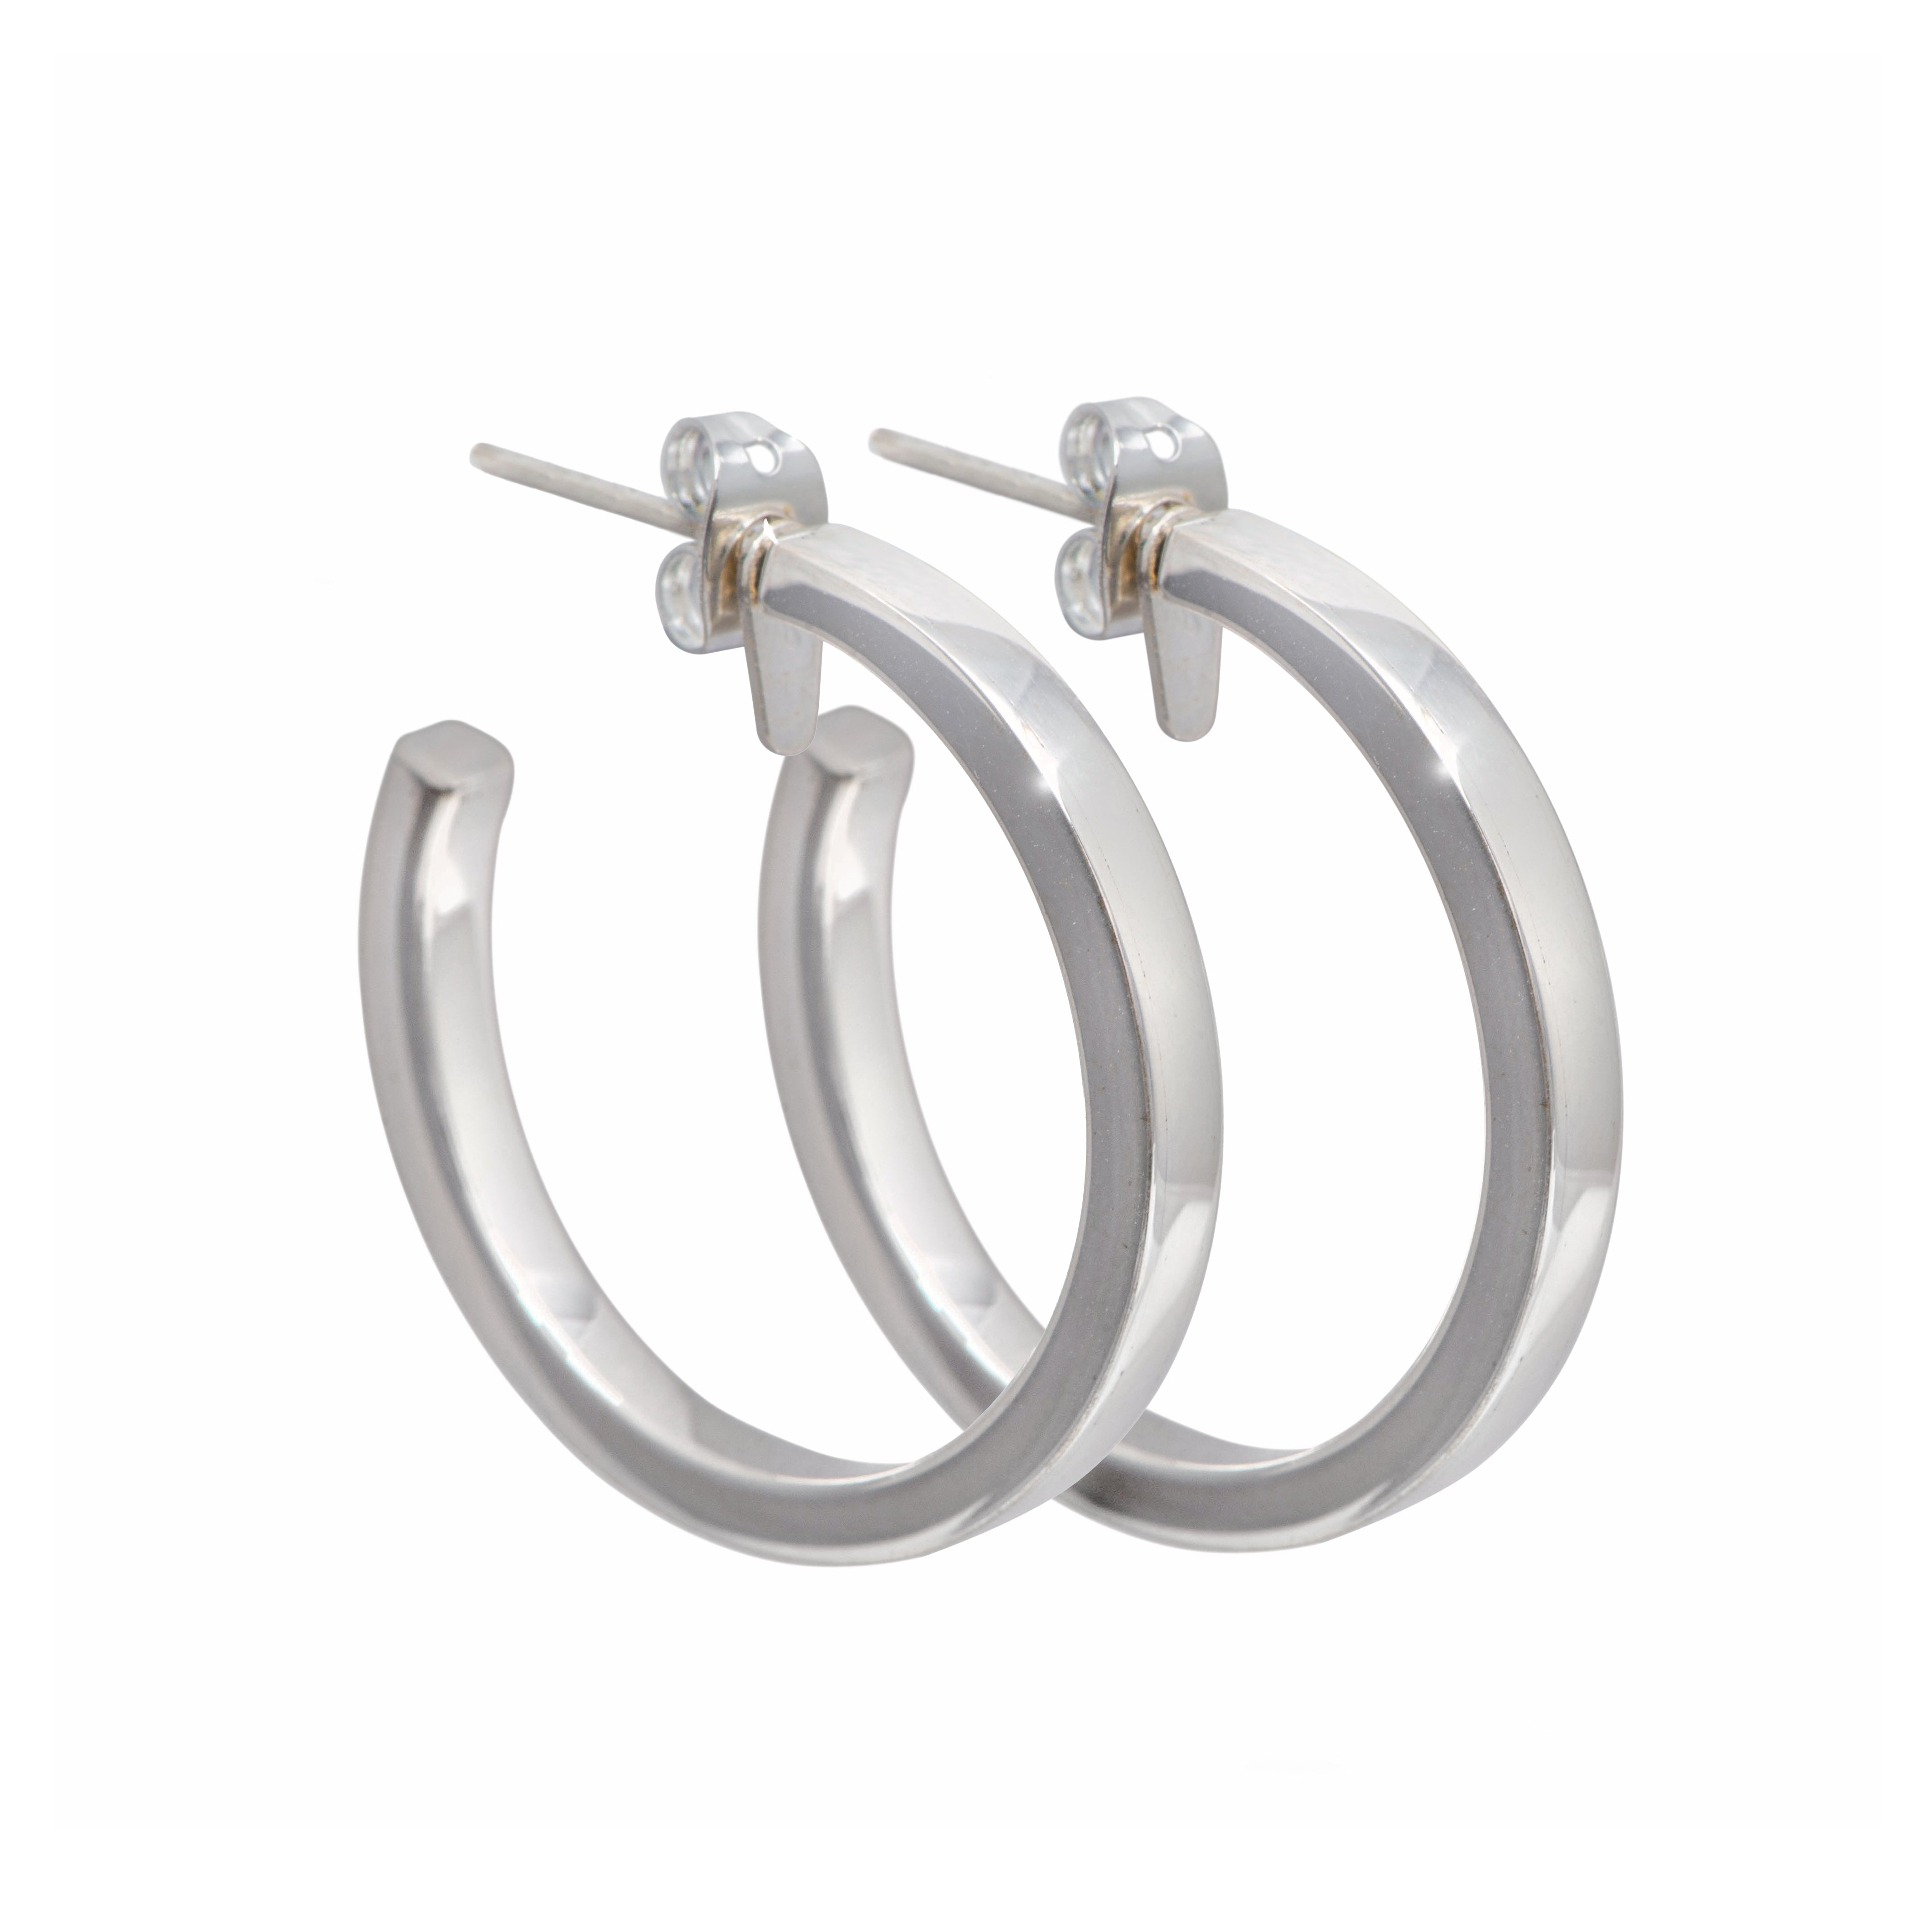 Sterling Silver Large Hoop Earrings with a Flat Square Edge